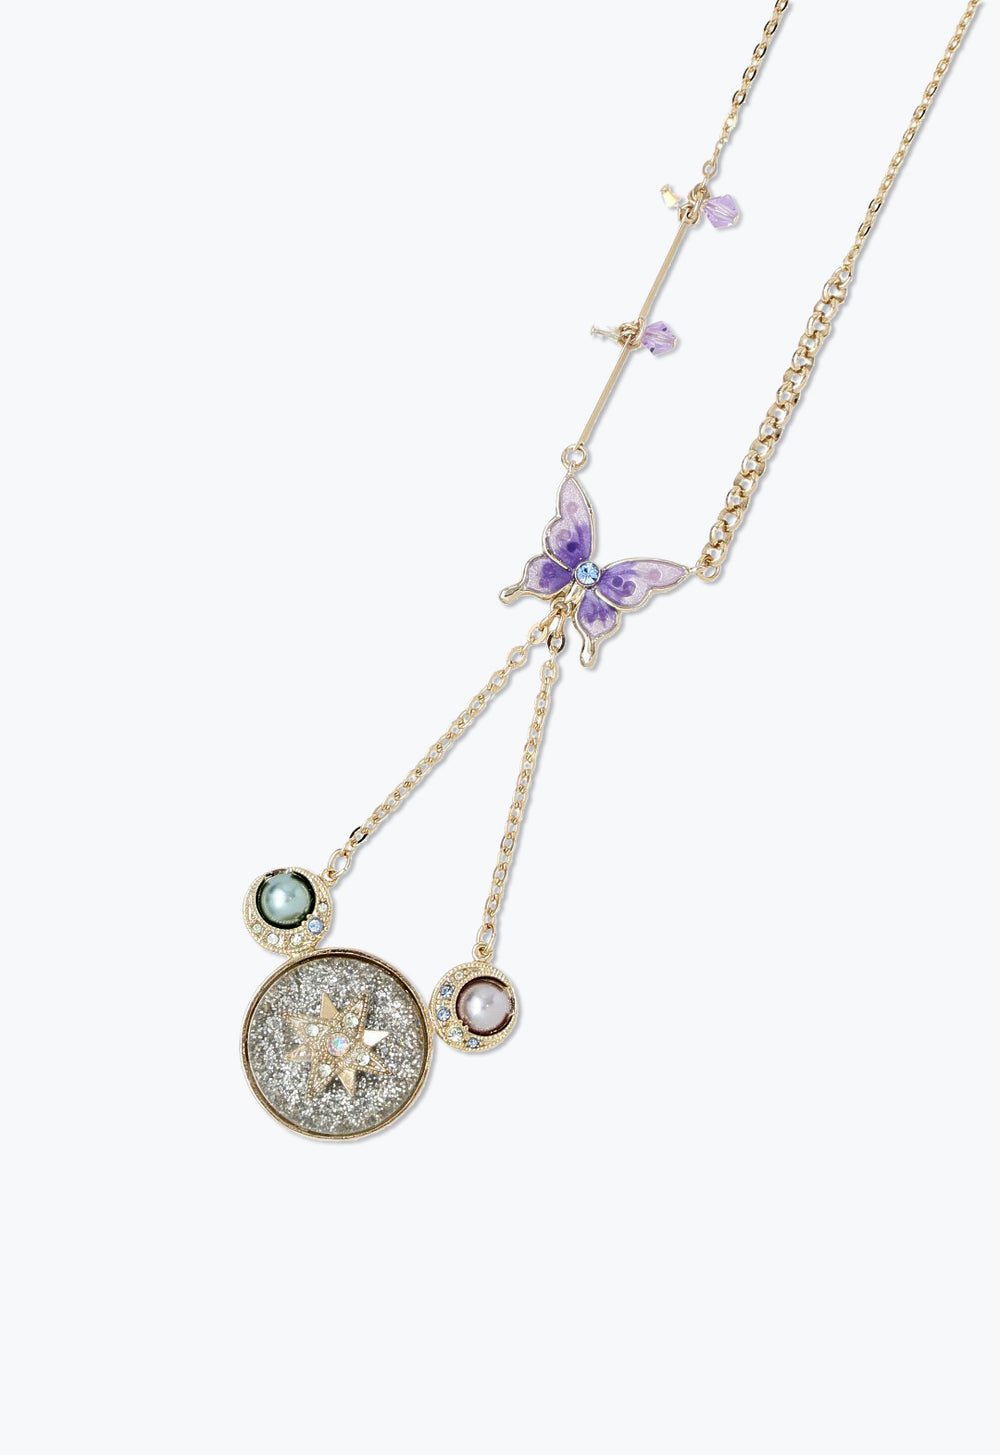 Purple butterfly, round pendant with strass, star shape in background with transparent stones